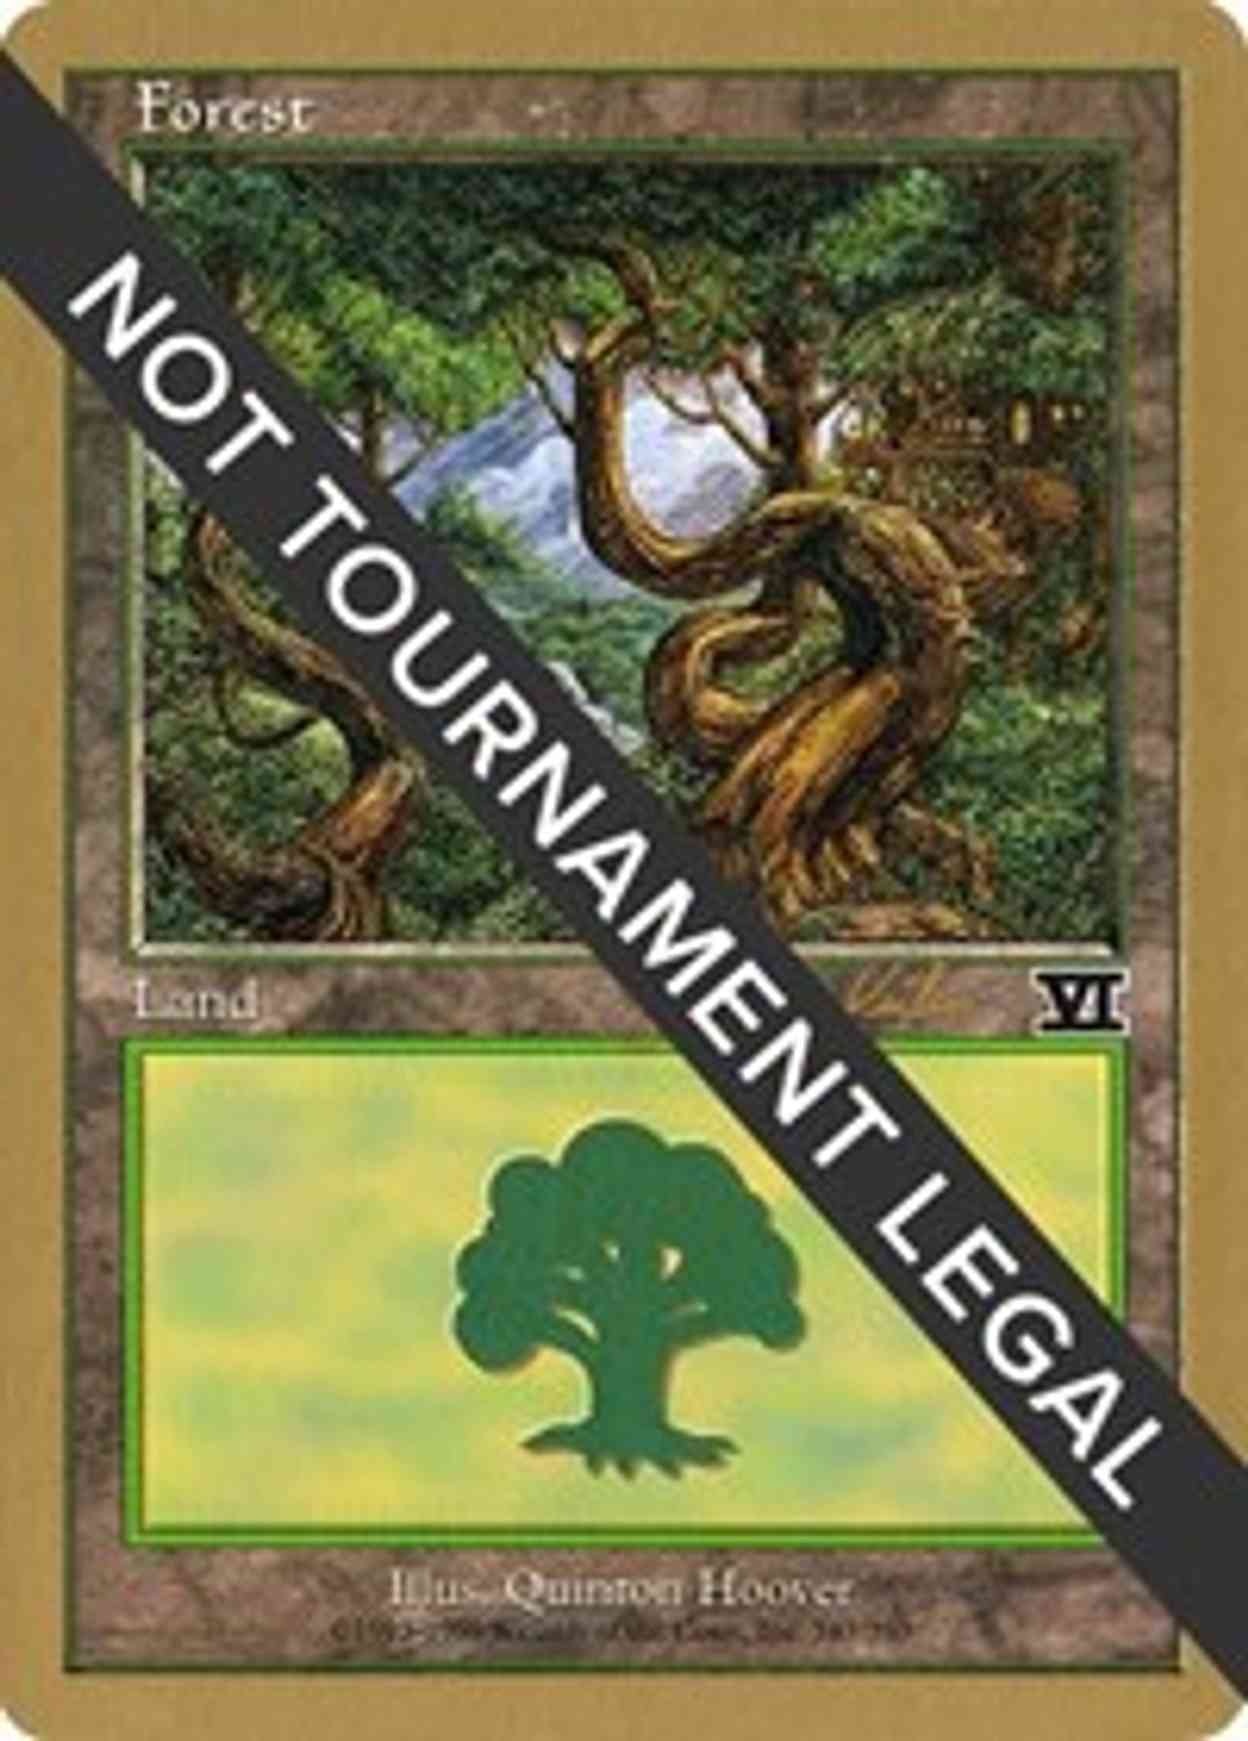 Forest (347) - 2000 Janosch Kuhn (6ED) magic card front